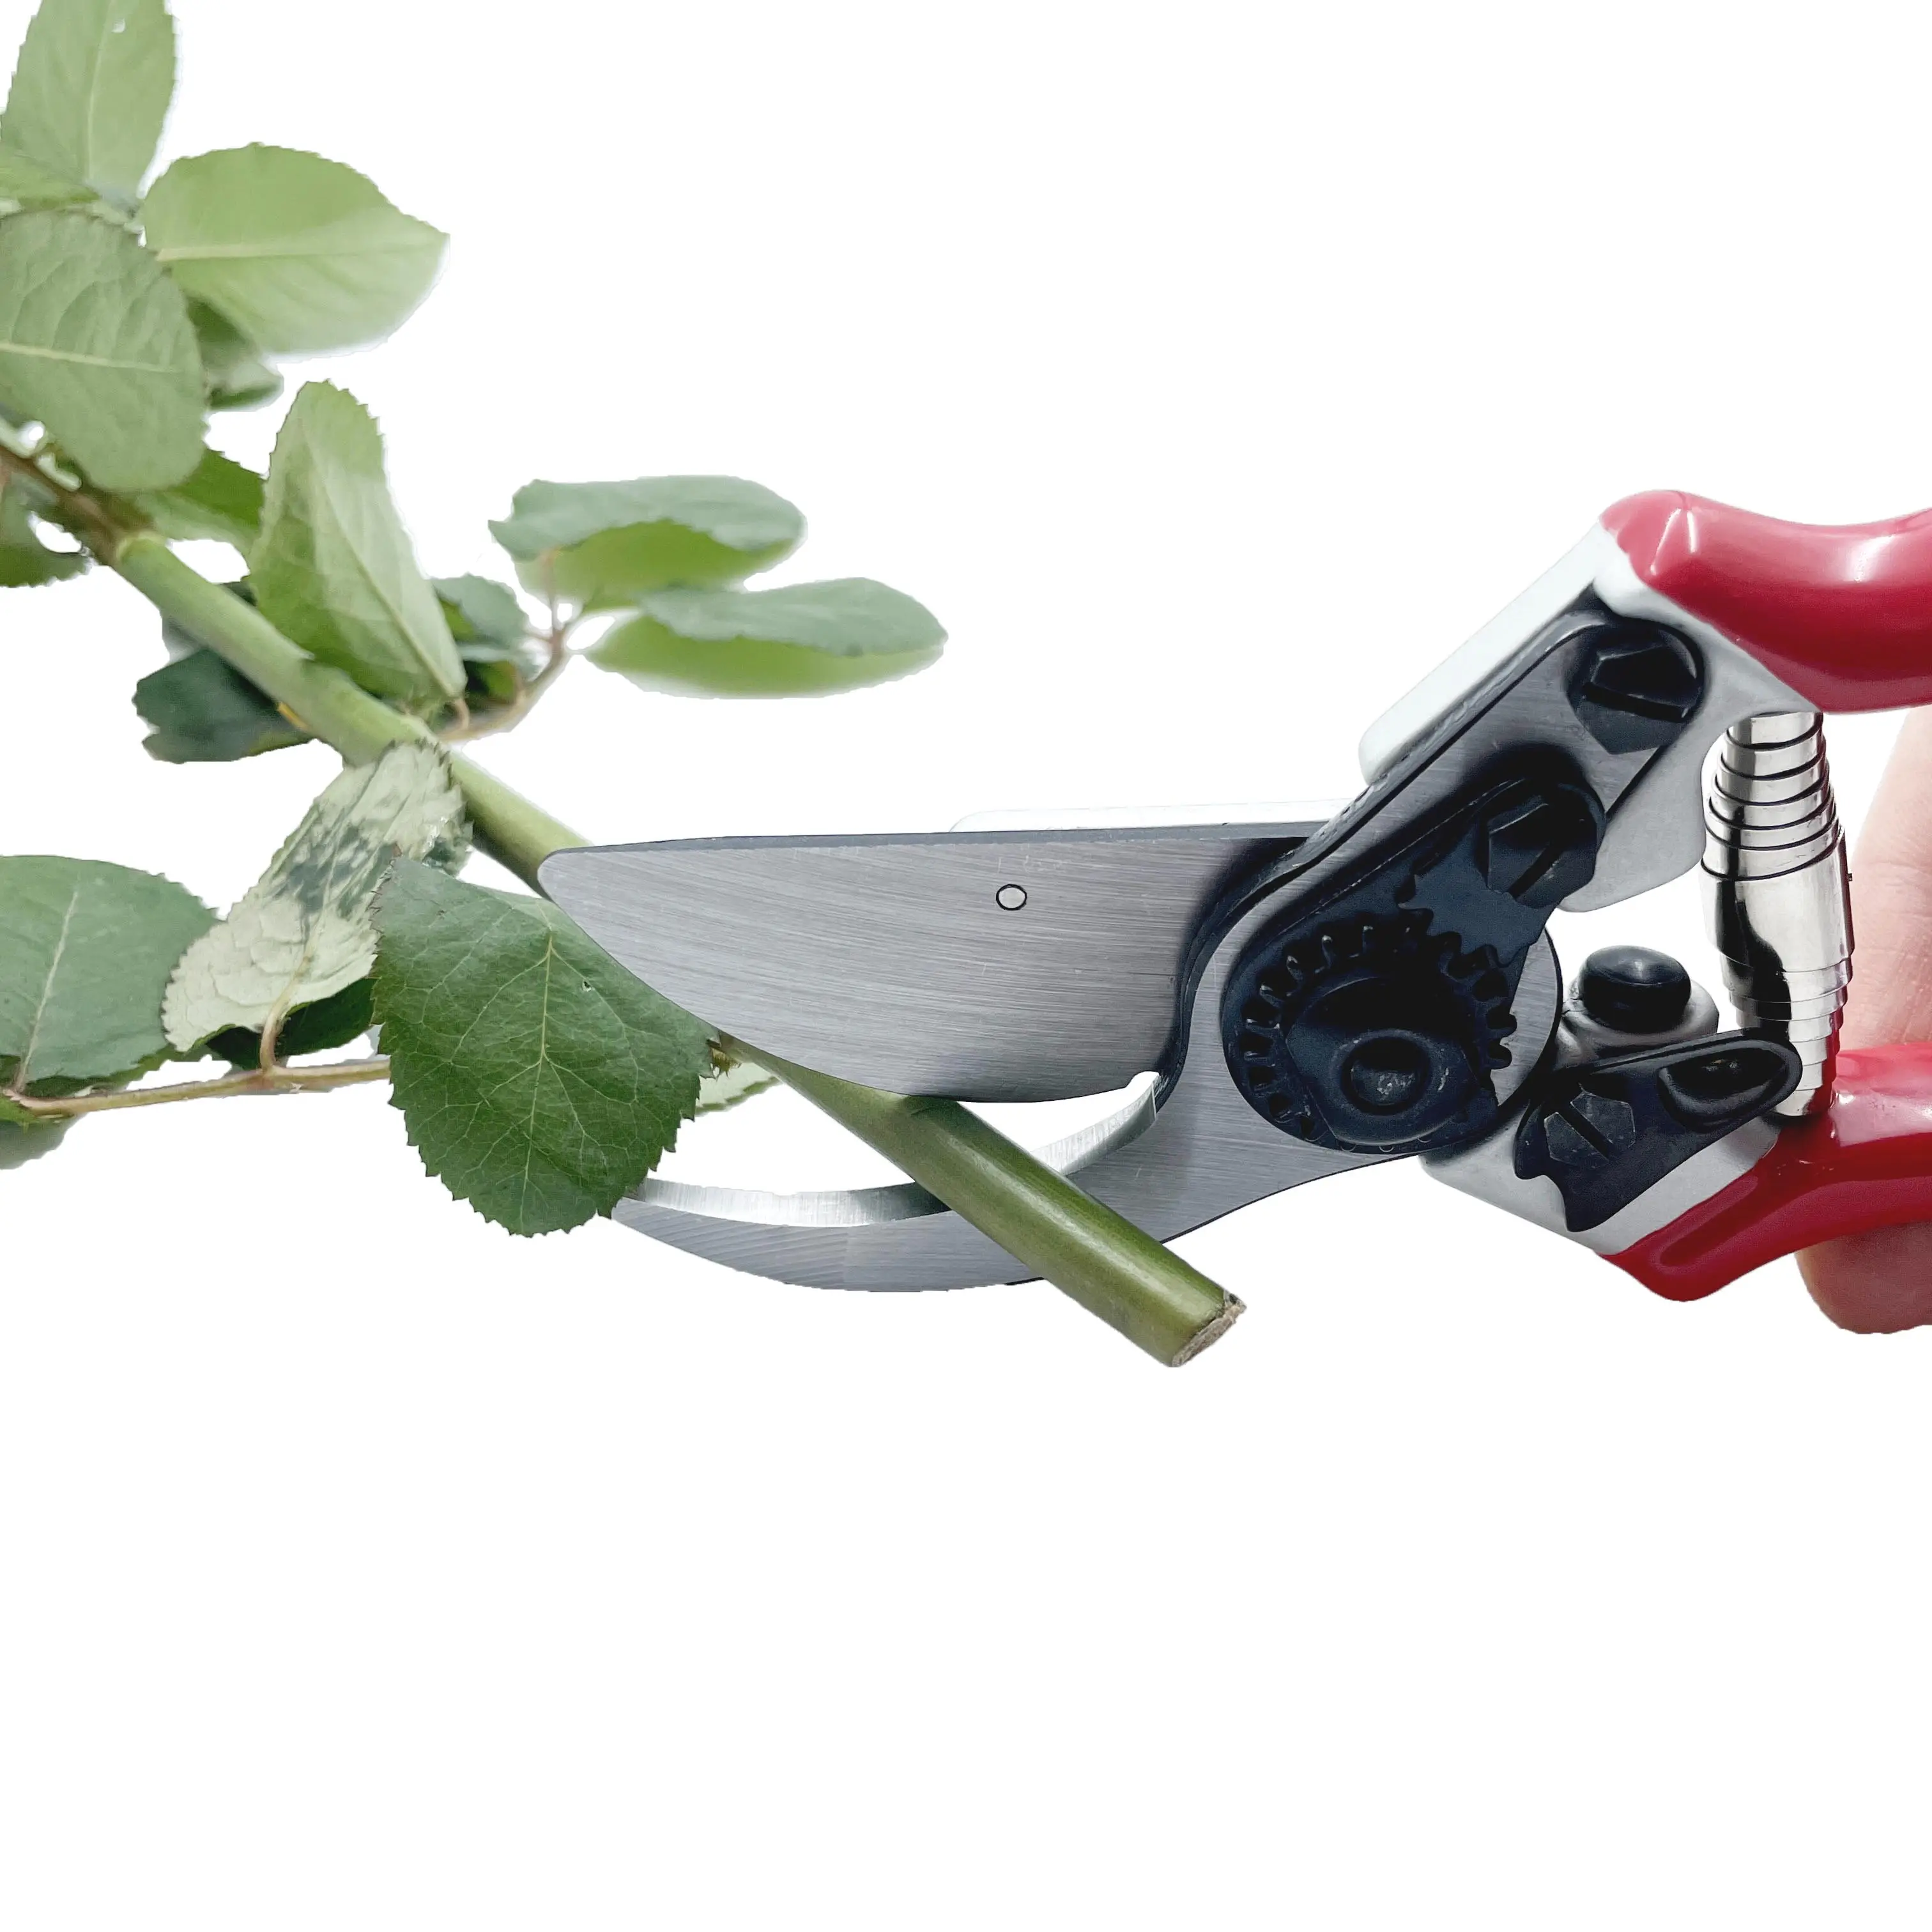 Aluminum Alloy Pruning Shears for Cutting Branches of Bonsai